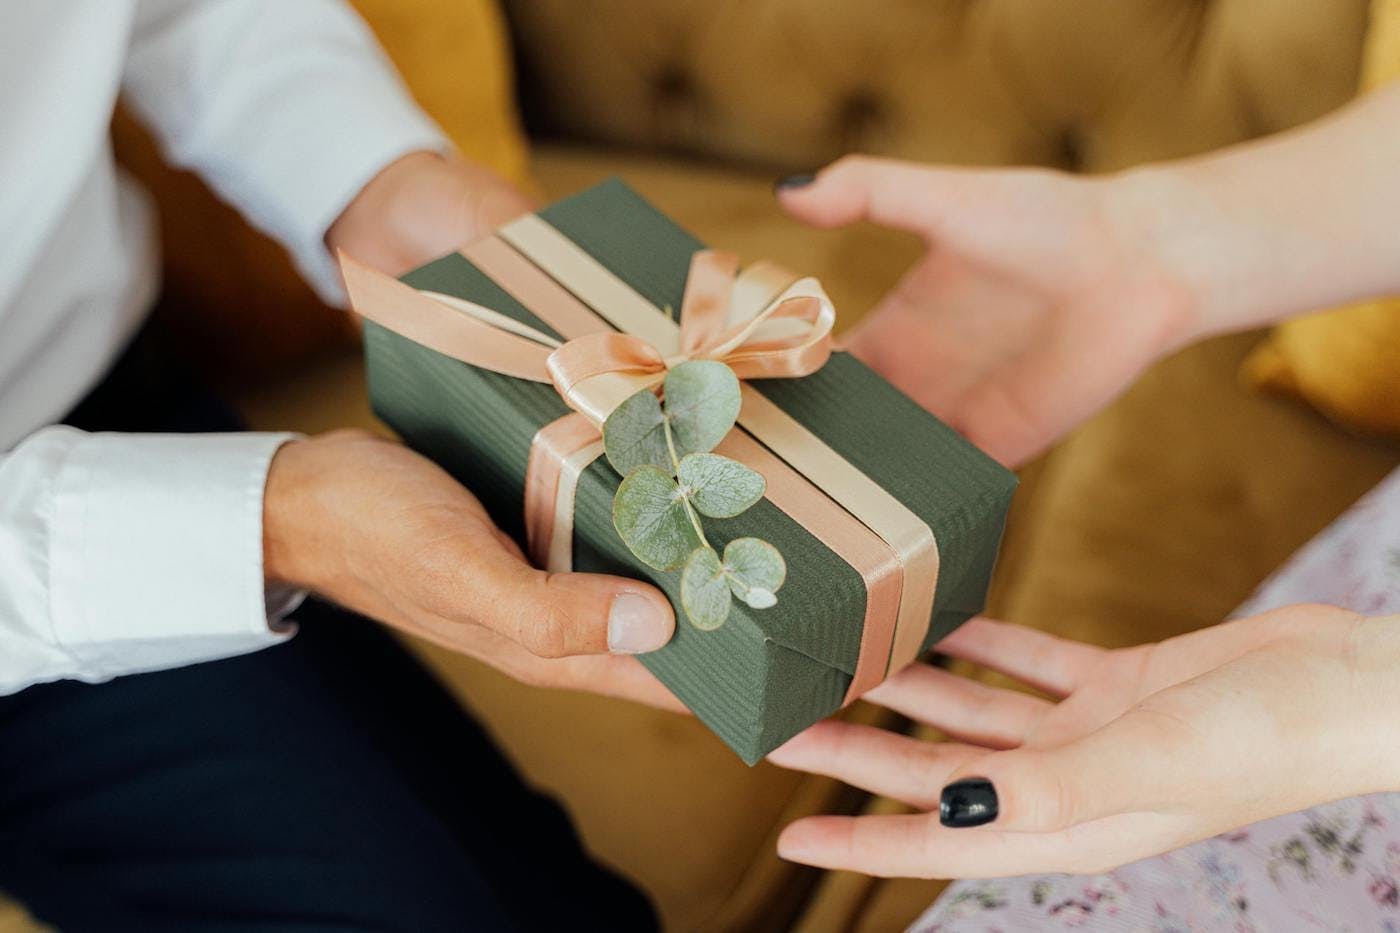 Why does gifting bring us so much joy?